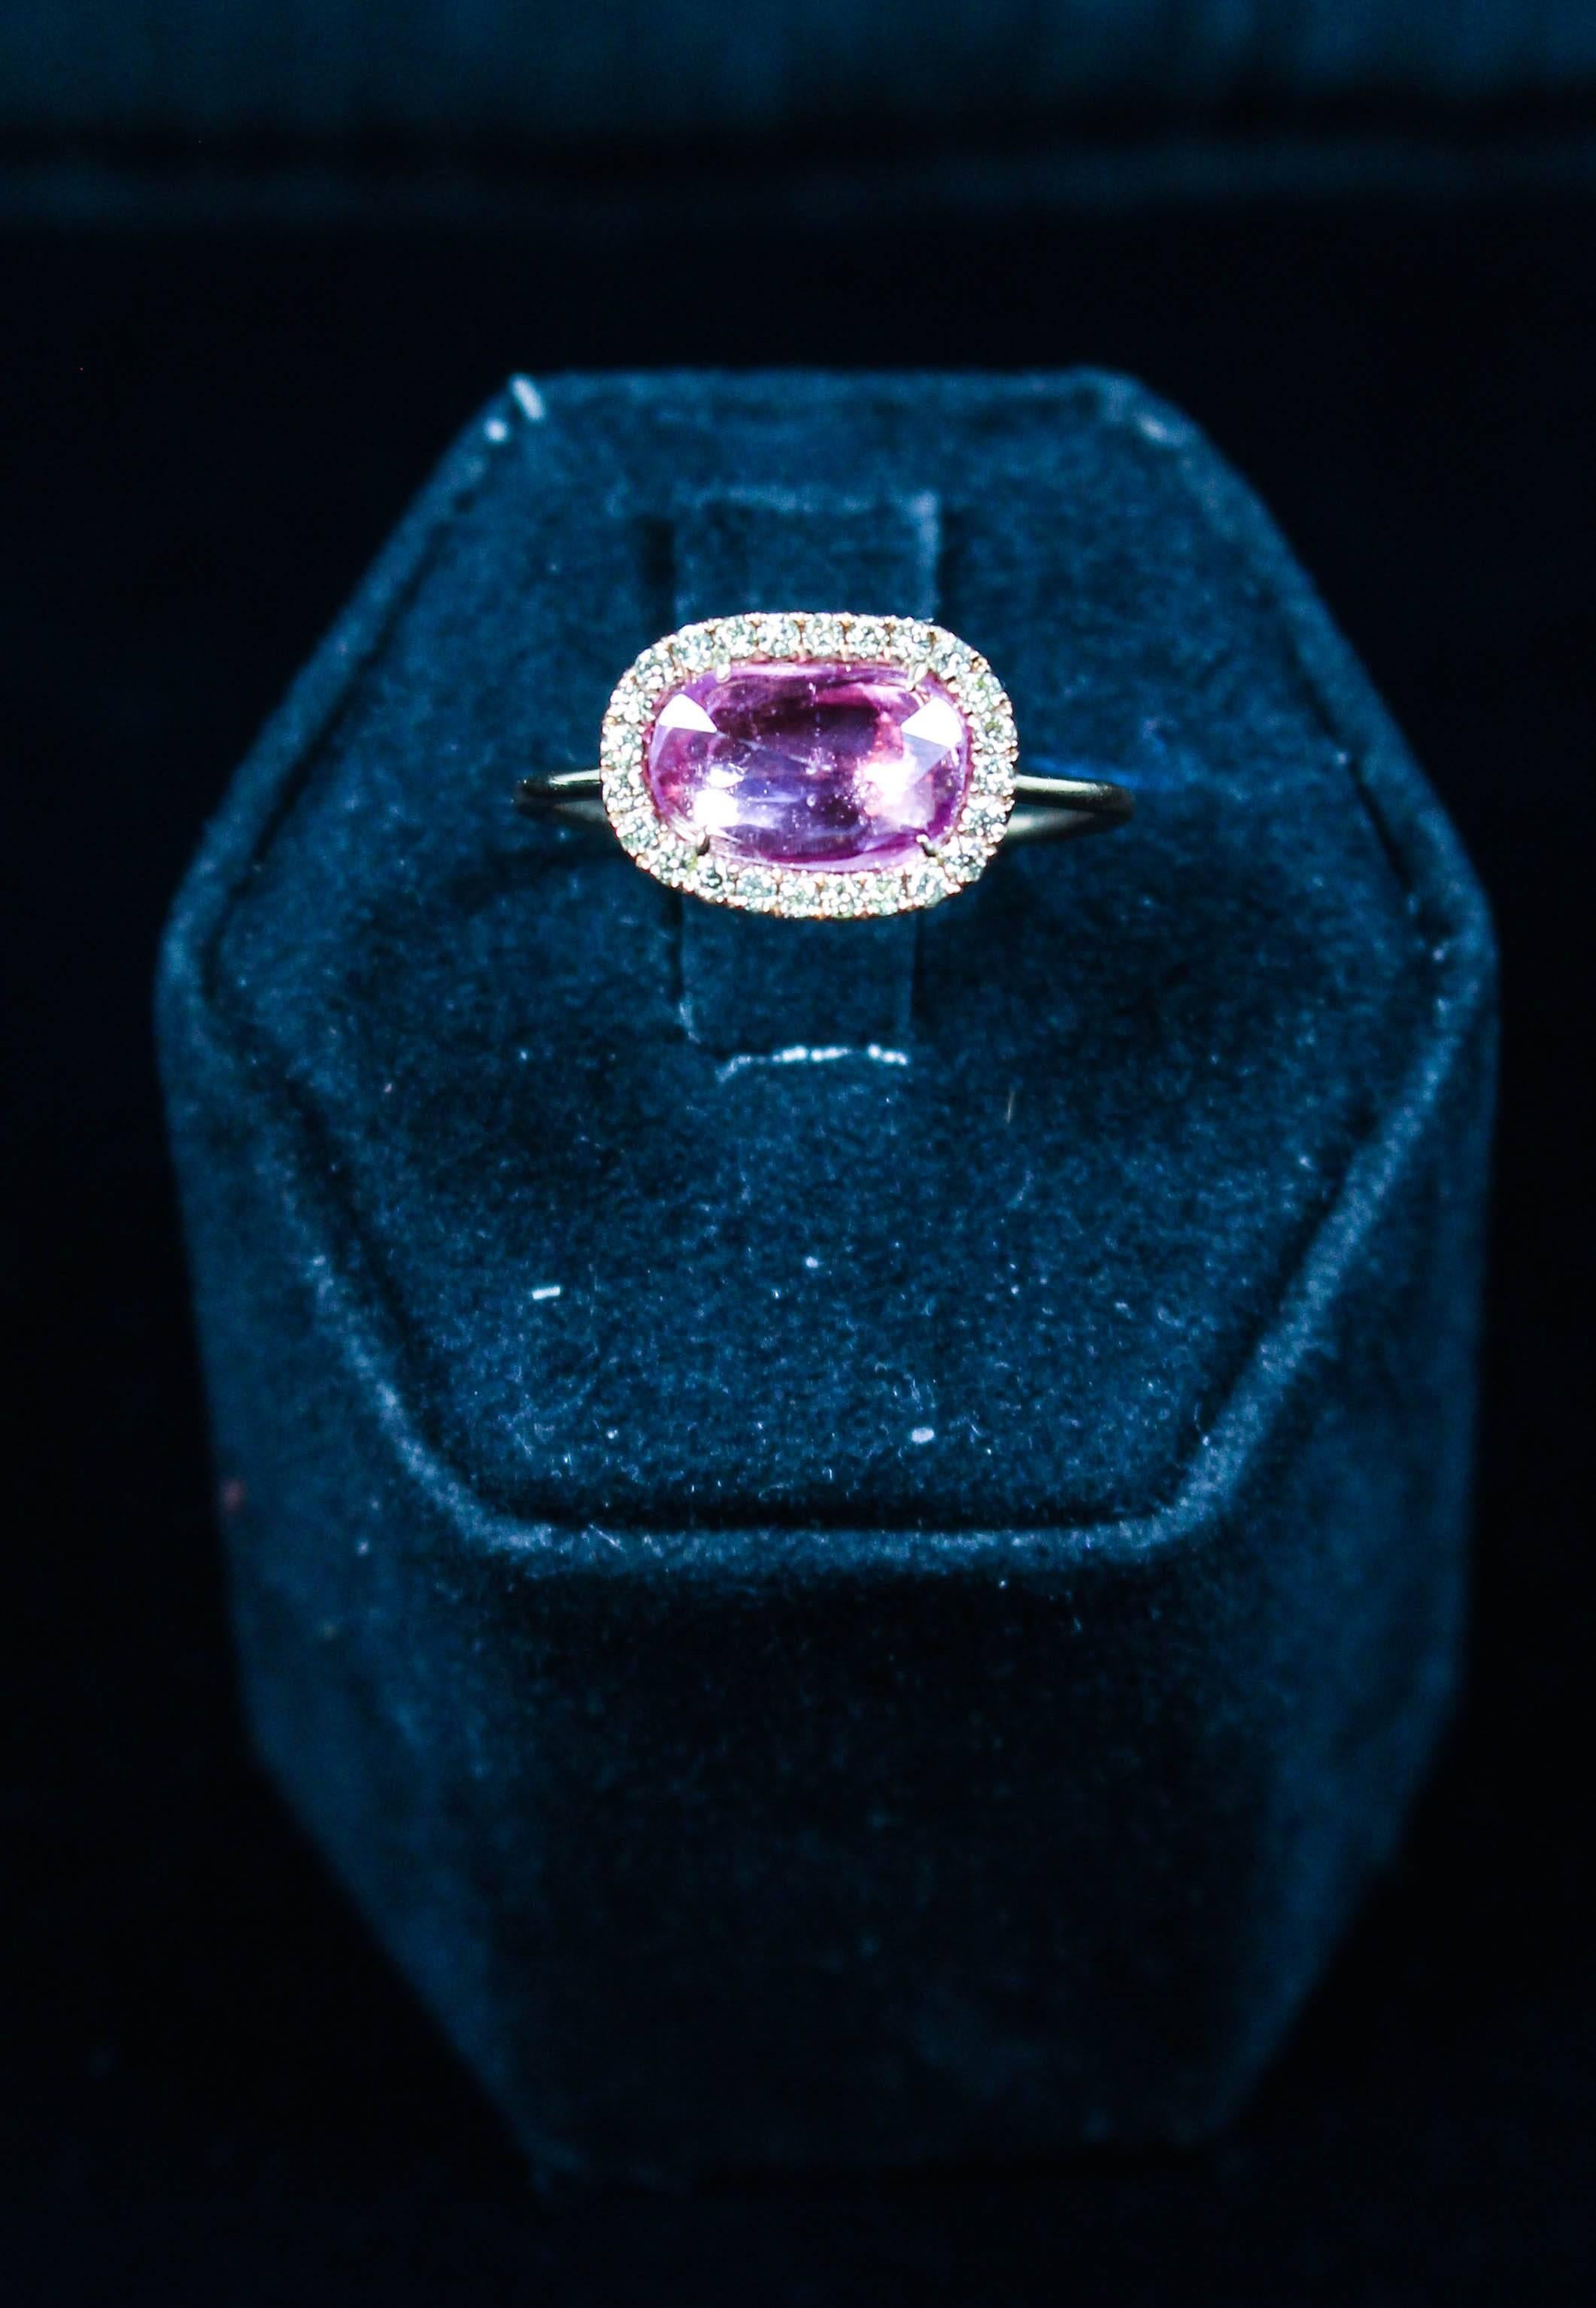 This beautiful ring features a stunning pink sapphire center stone and is composed of 18kt rose gold. There are pave diamonds which accent the center stone. Specs below. In excellent condition.

Please feel free to ask any questions you may have, we